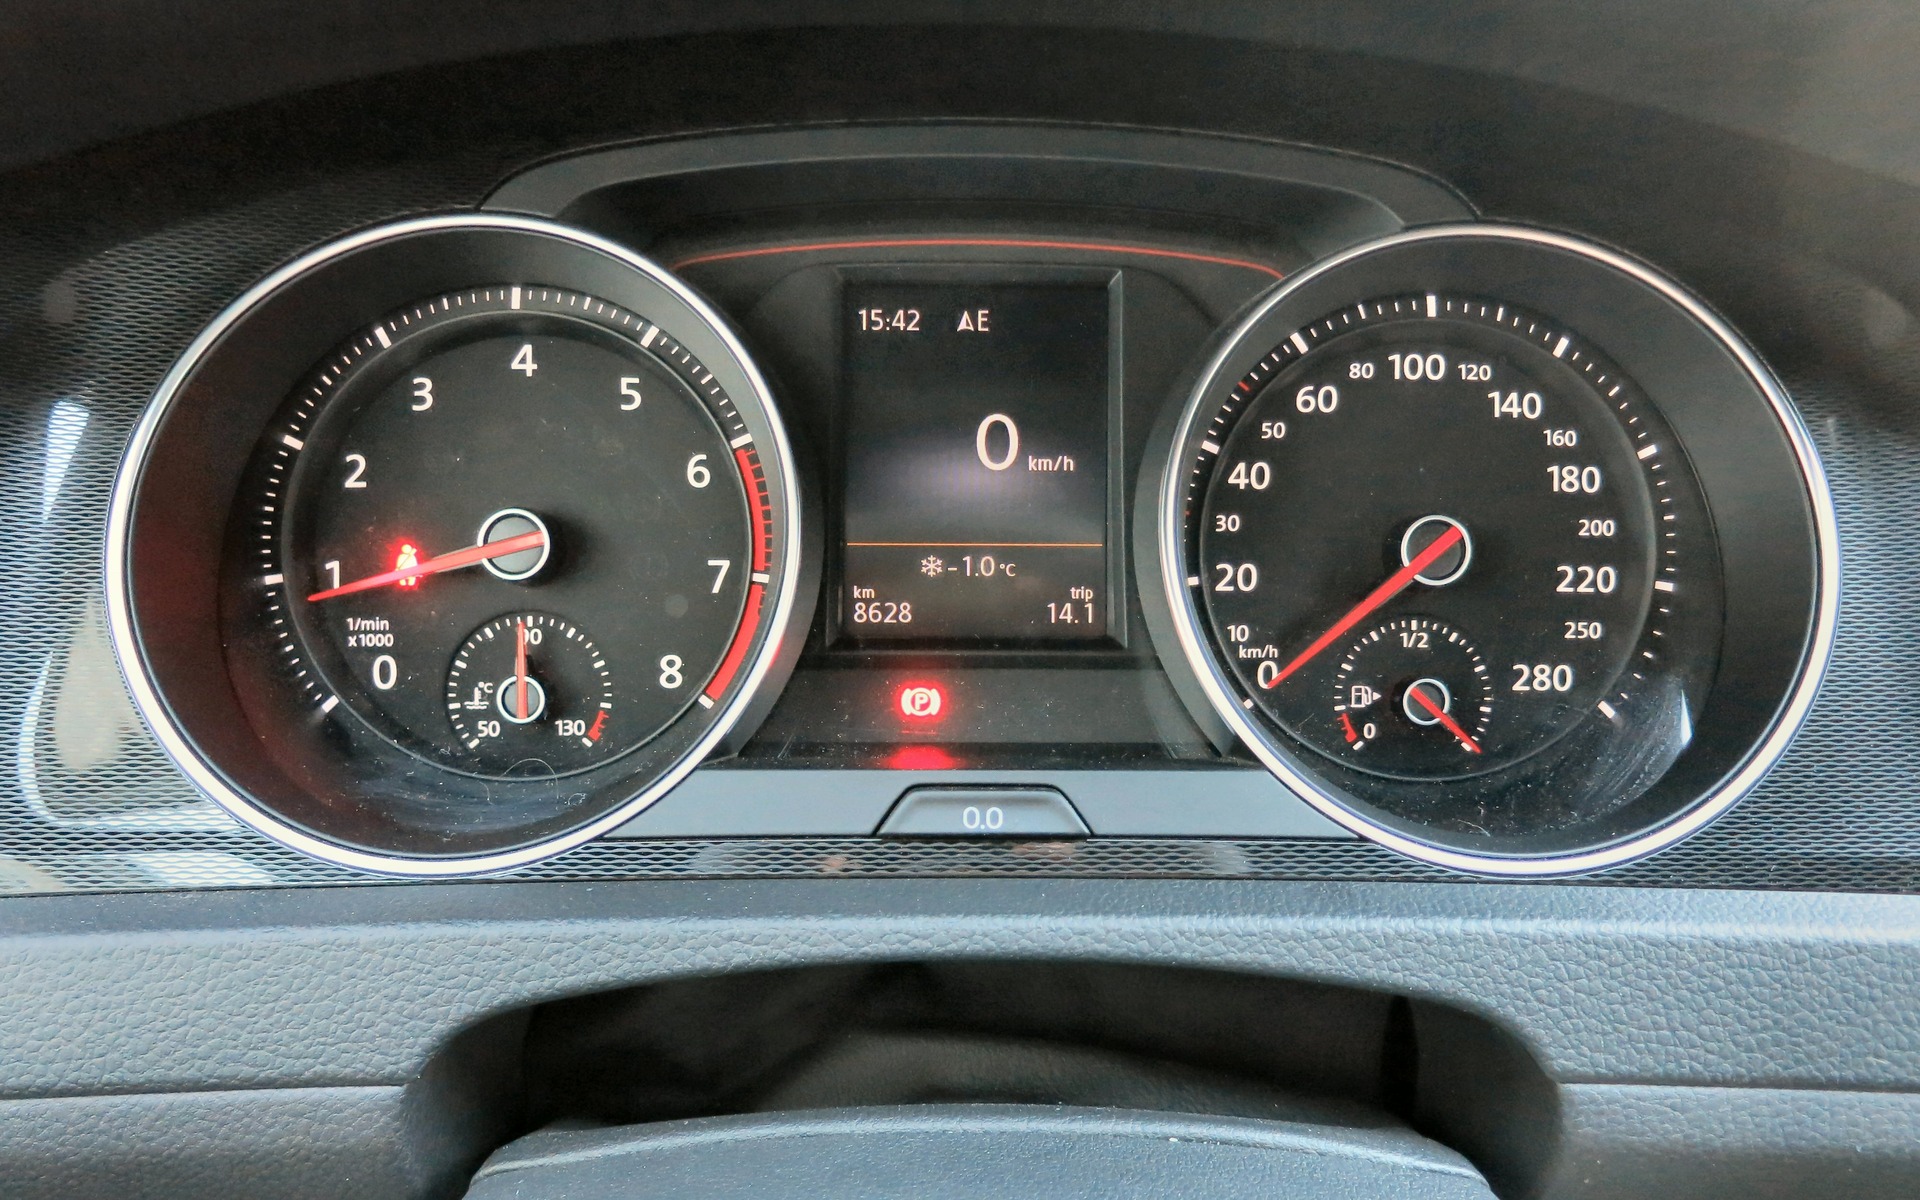 The gauge cluster is simple and straightforward.